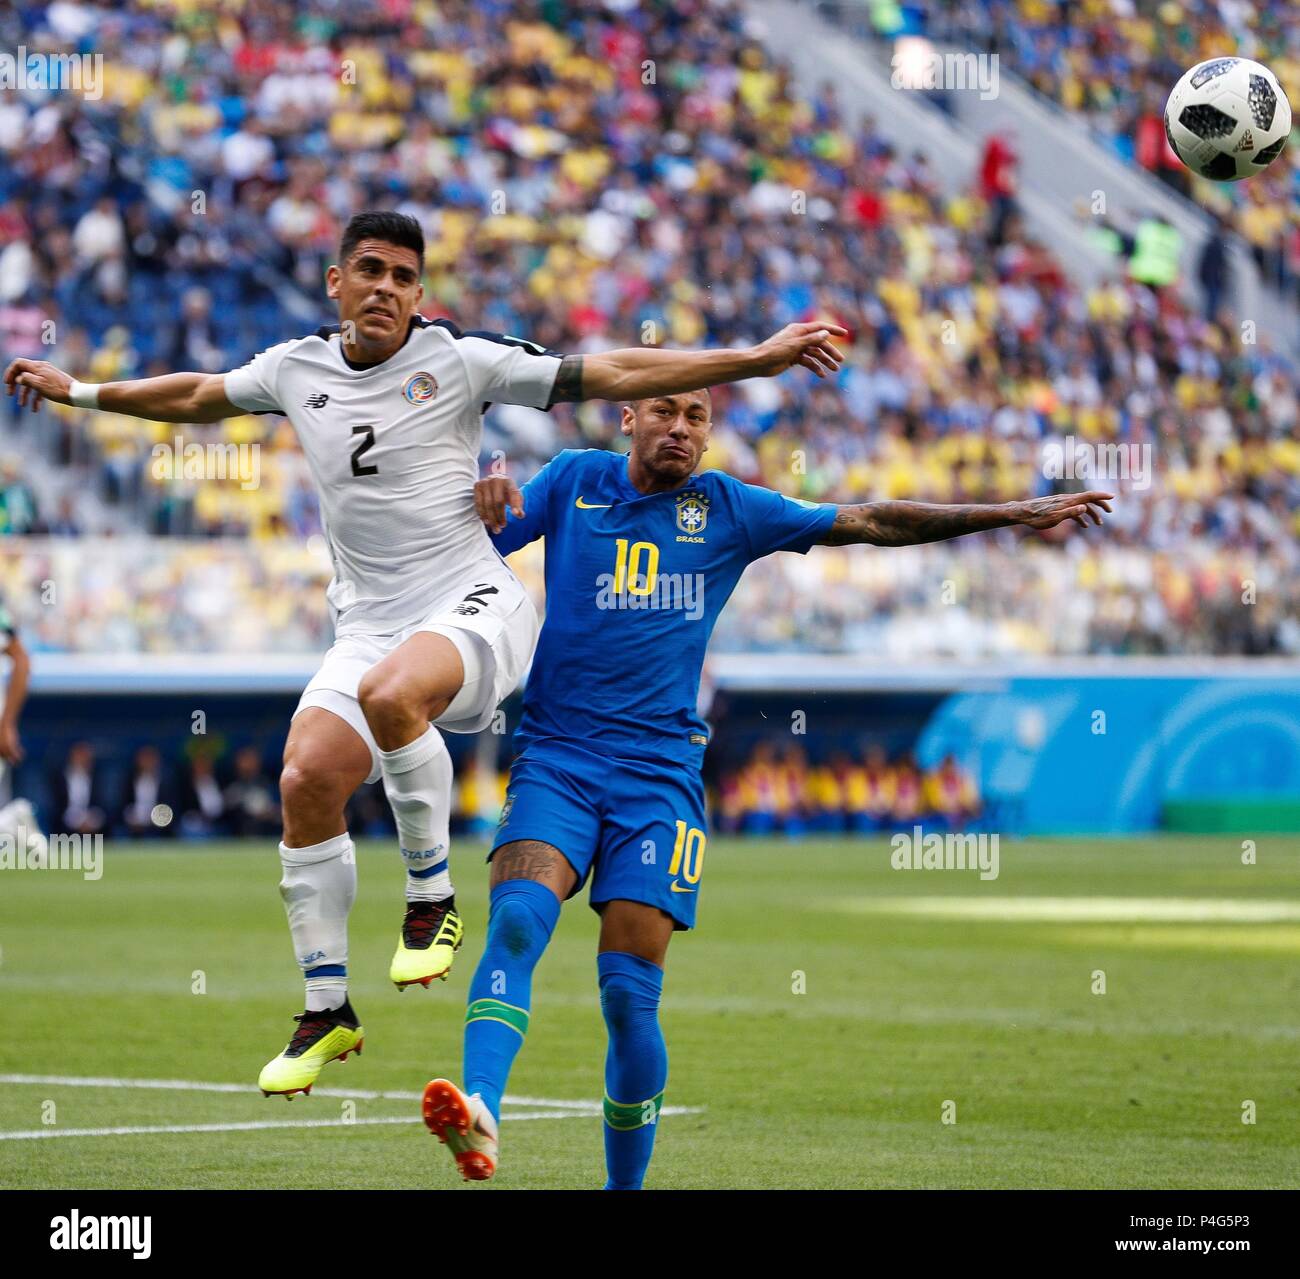 St Petersburg, Russia. 22 June 2018. BRAZIL VS. COSTA RICA Johnny Acosta from Costa Rica contests ball with Brazil&#39;s Neymr. Jr. during a match between Brazil and Costa Rica for the second round of group E of the 2018 World Cup held at the Krestovsky Stadium in St Petersburg, Russia. (Photo: Marcelo Machado de Melo/Fotoarena) Credit: Foto Arena LTDA/Alamy Live News Stock Photo